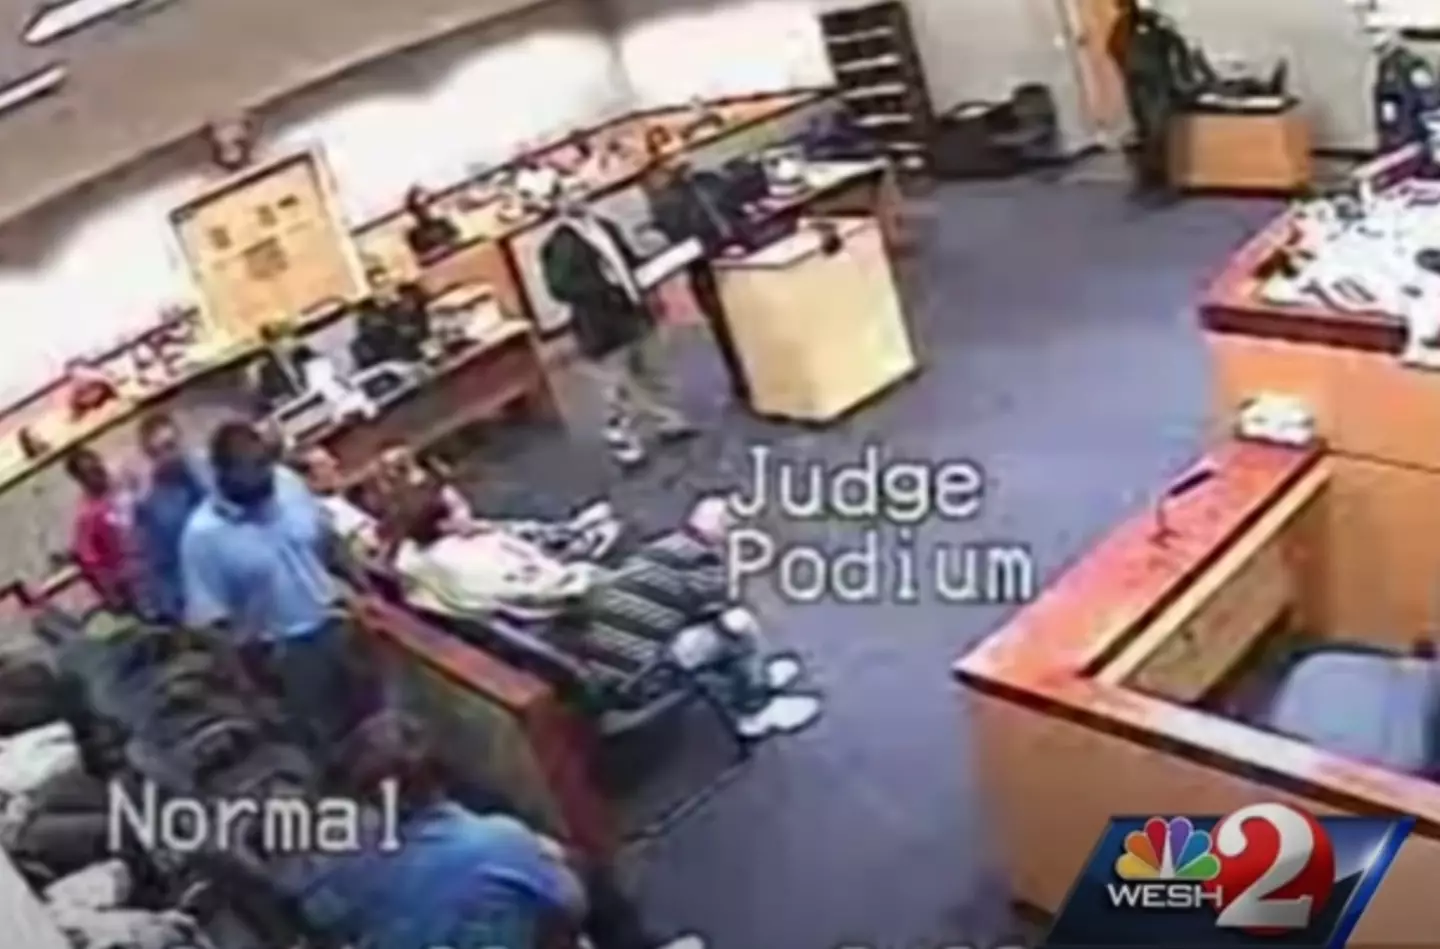 The courtroom started clapping once the fight was over.